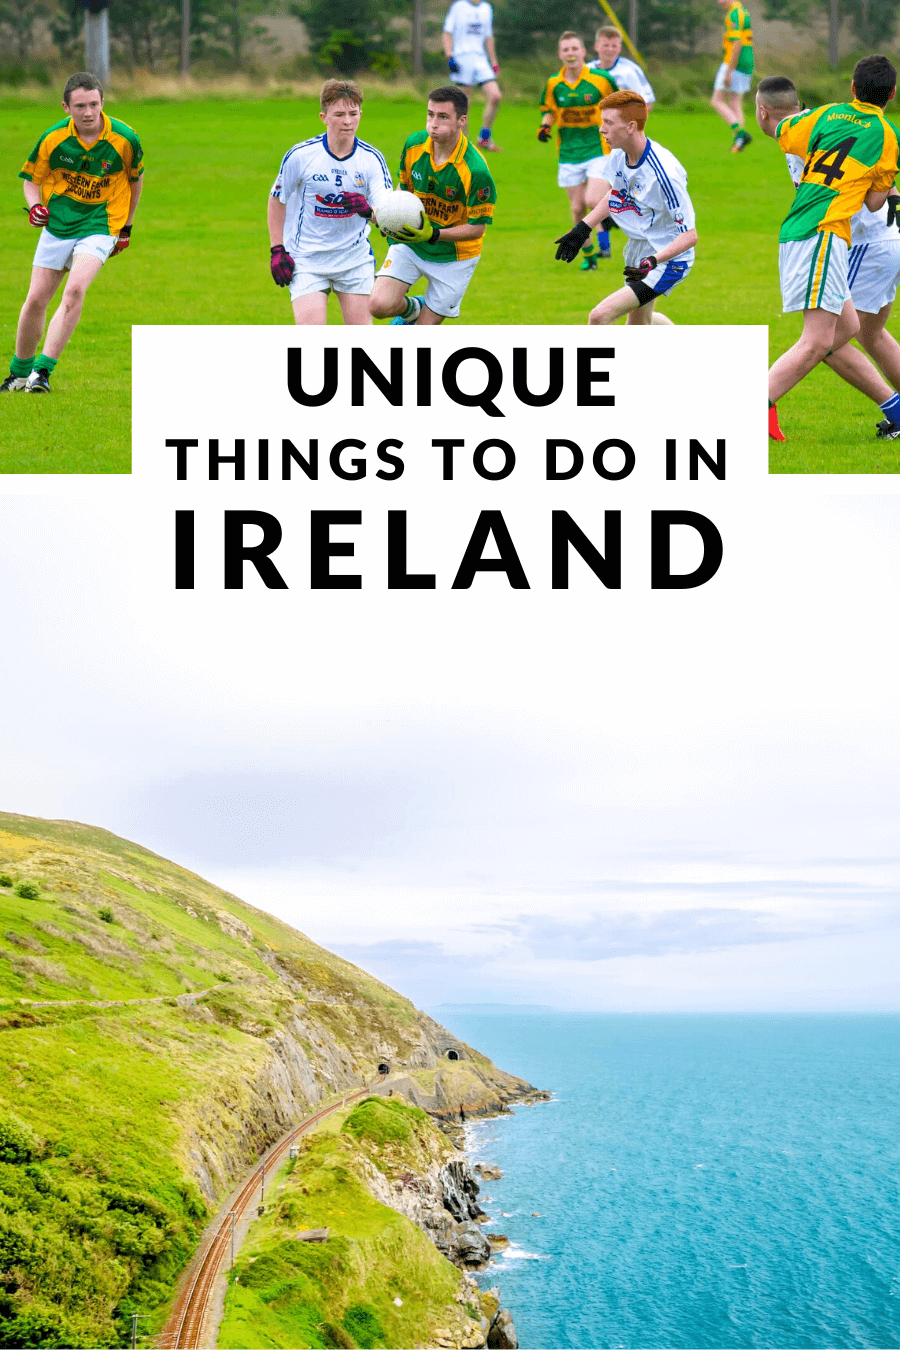 Visiting the Emerald Isle and looking for the best things to see and do? Discover unforgettable and unique things to do in Ireland!